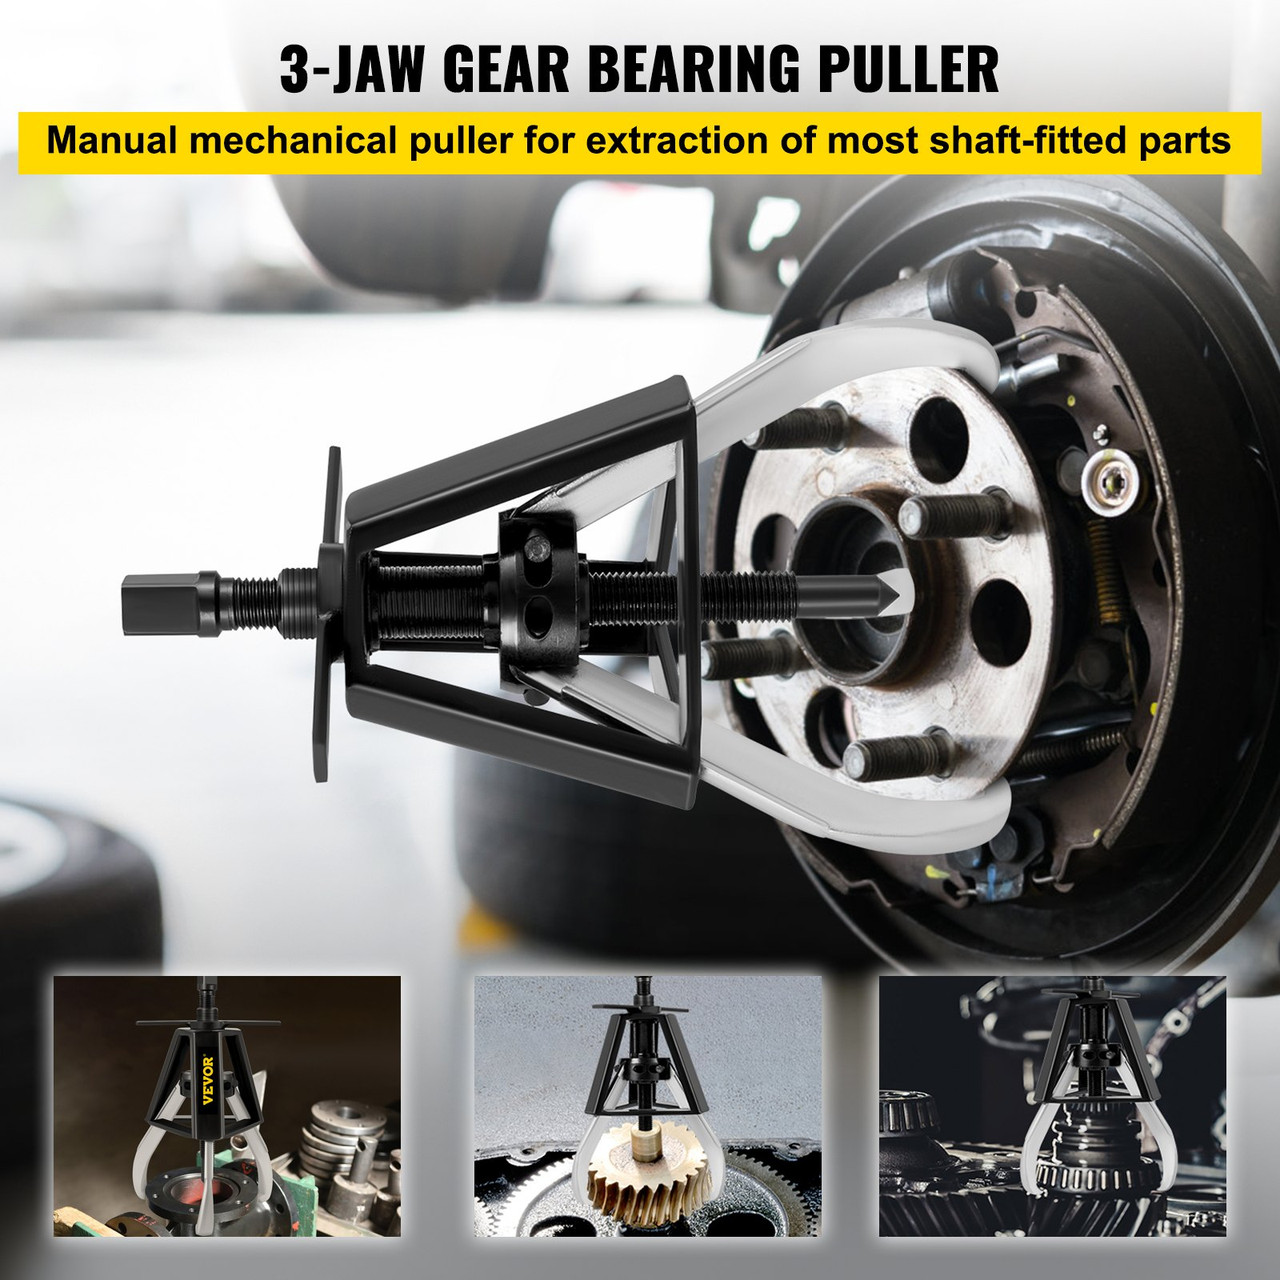 3 Jaw Gear Puller, 1 Ton/2204 LBS Capacity Manual Puller, 13" - 21.6" Spread Reach and 3.9" - 7.9" Spread Range, 11" Lead Screw Length Gear Removal Tools For Slide Gears, Pulleys, and Flywheels